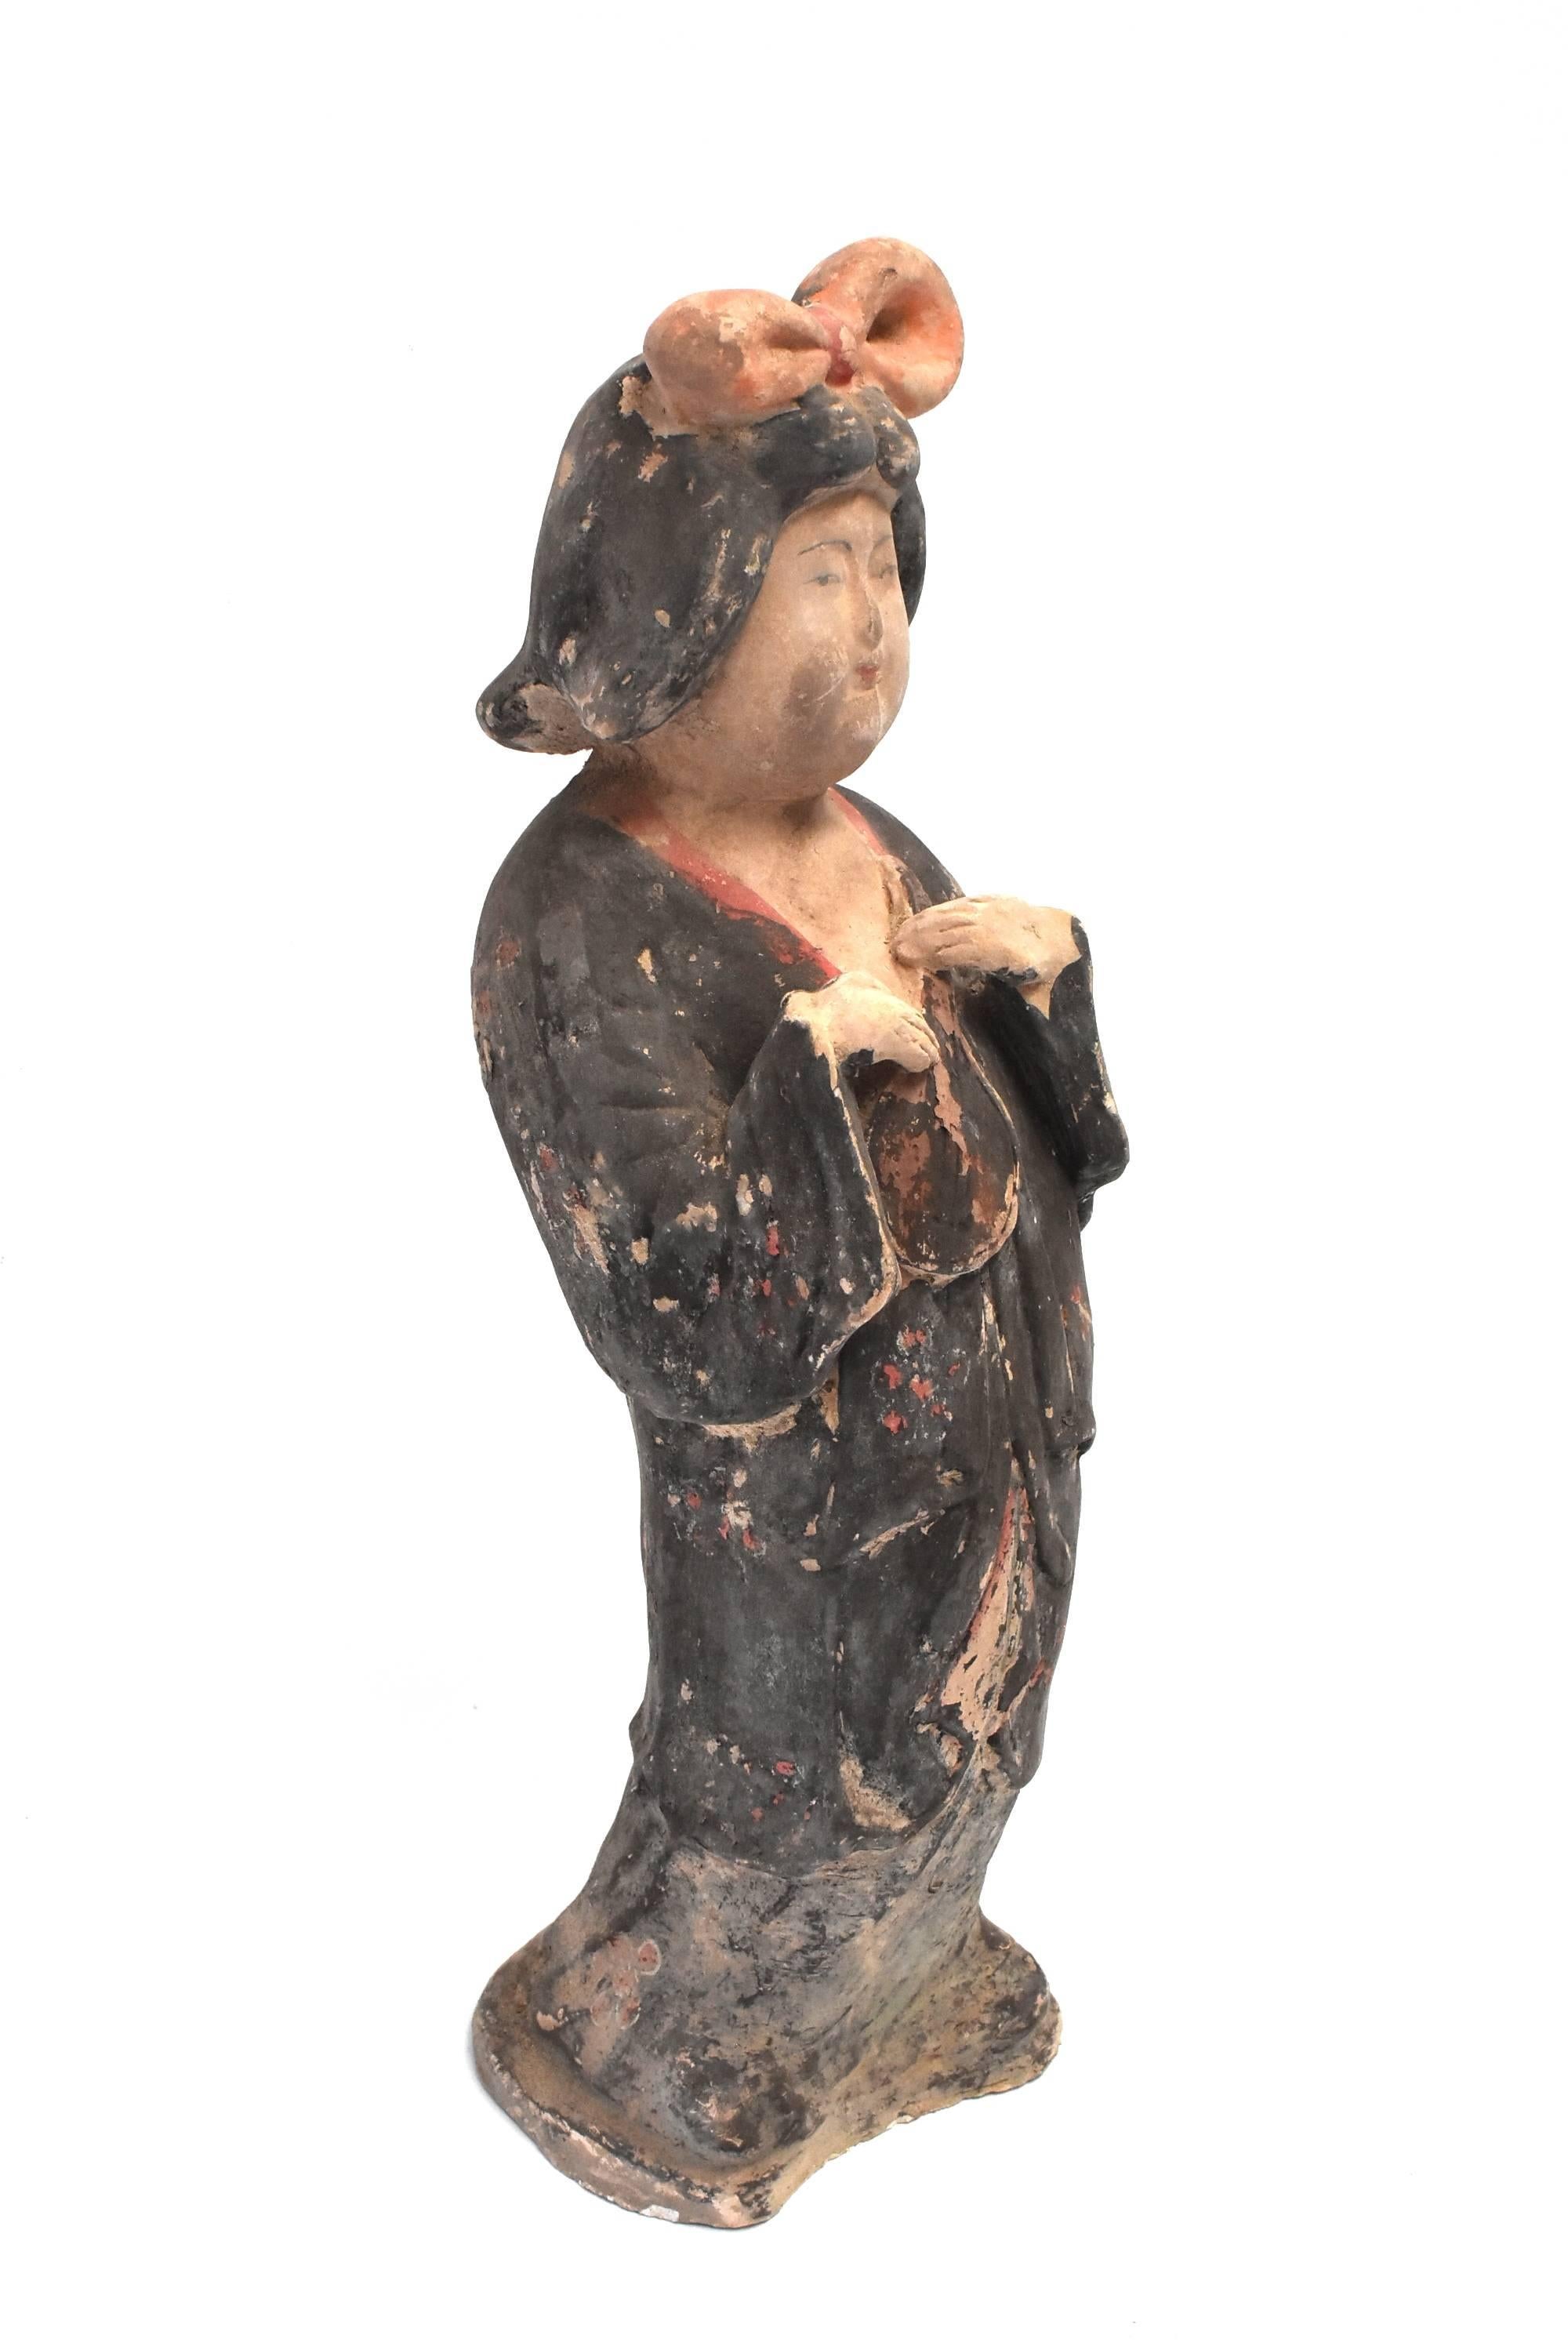 Special pricing! A nice pottery court lady in the Chinese Tang dynasty style. Fine facial features and traditional dress. The lady's expression is peaceful and serene. Her full face and body are consistent with Tang style. Large bow on her hair